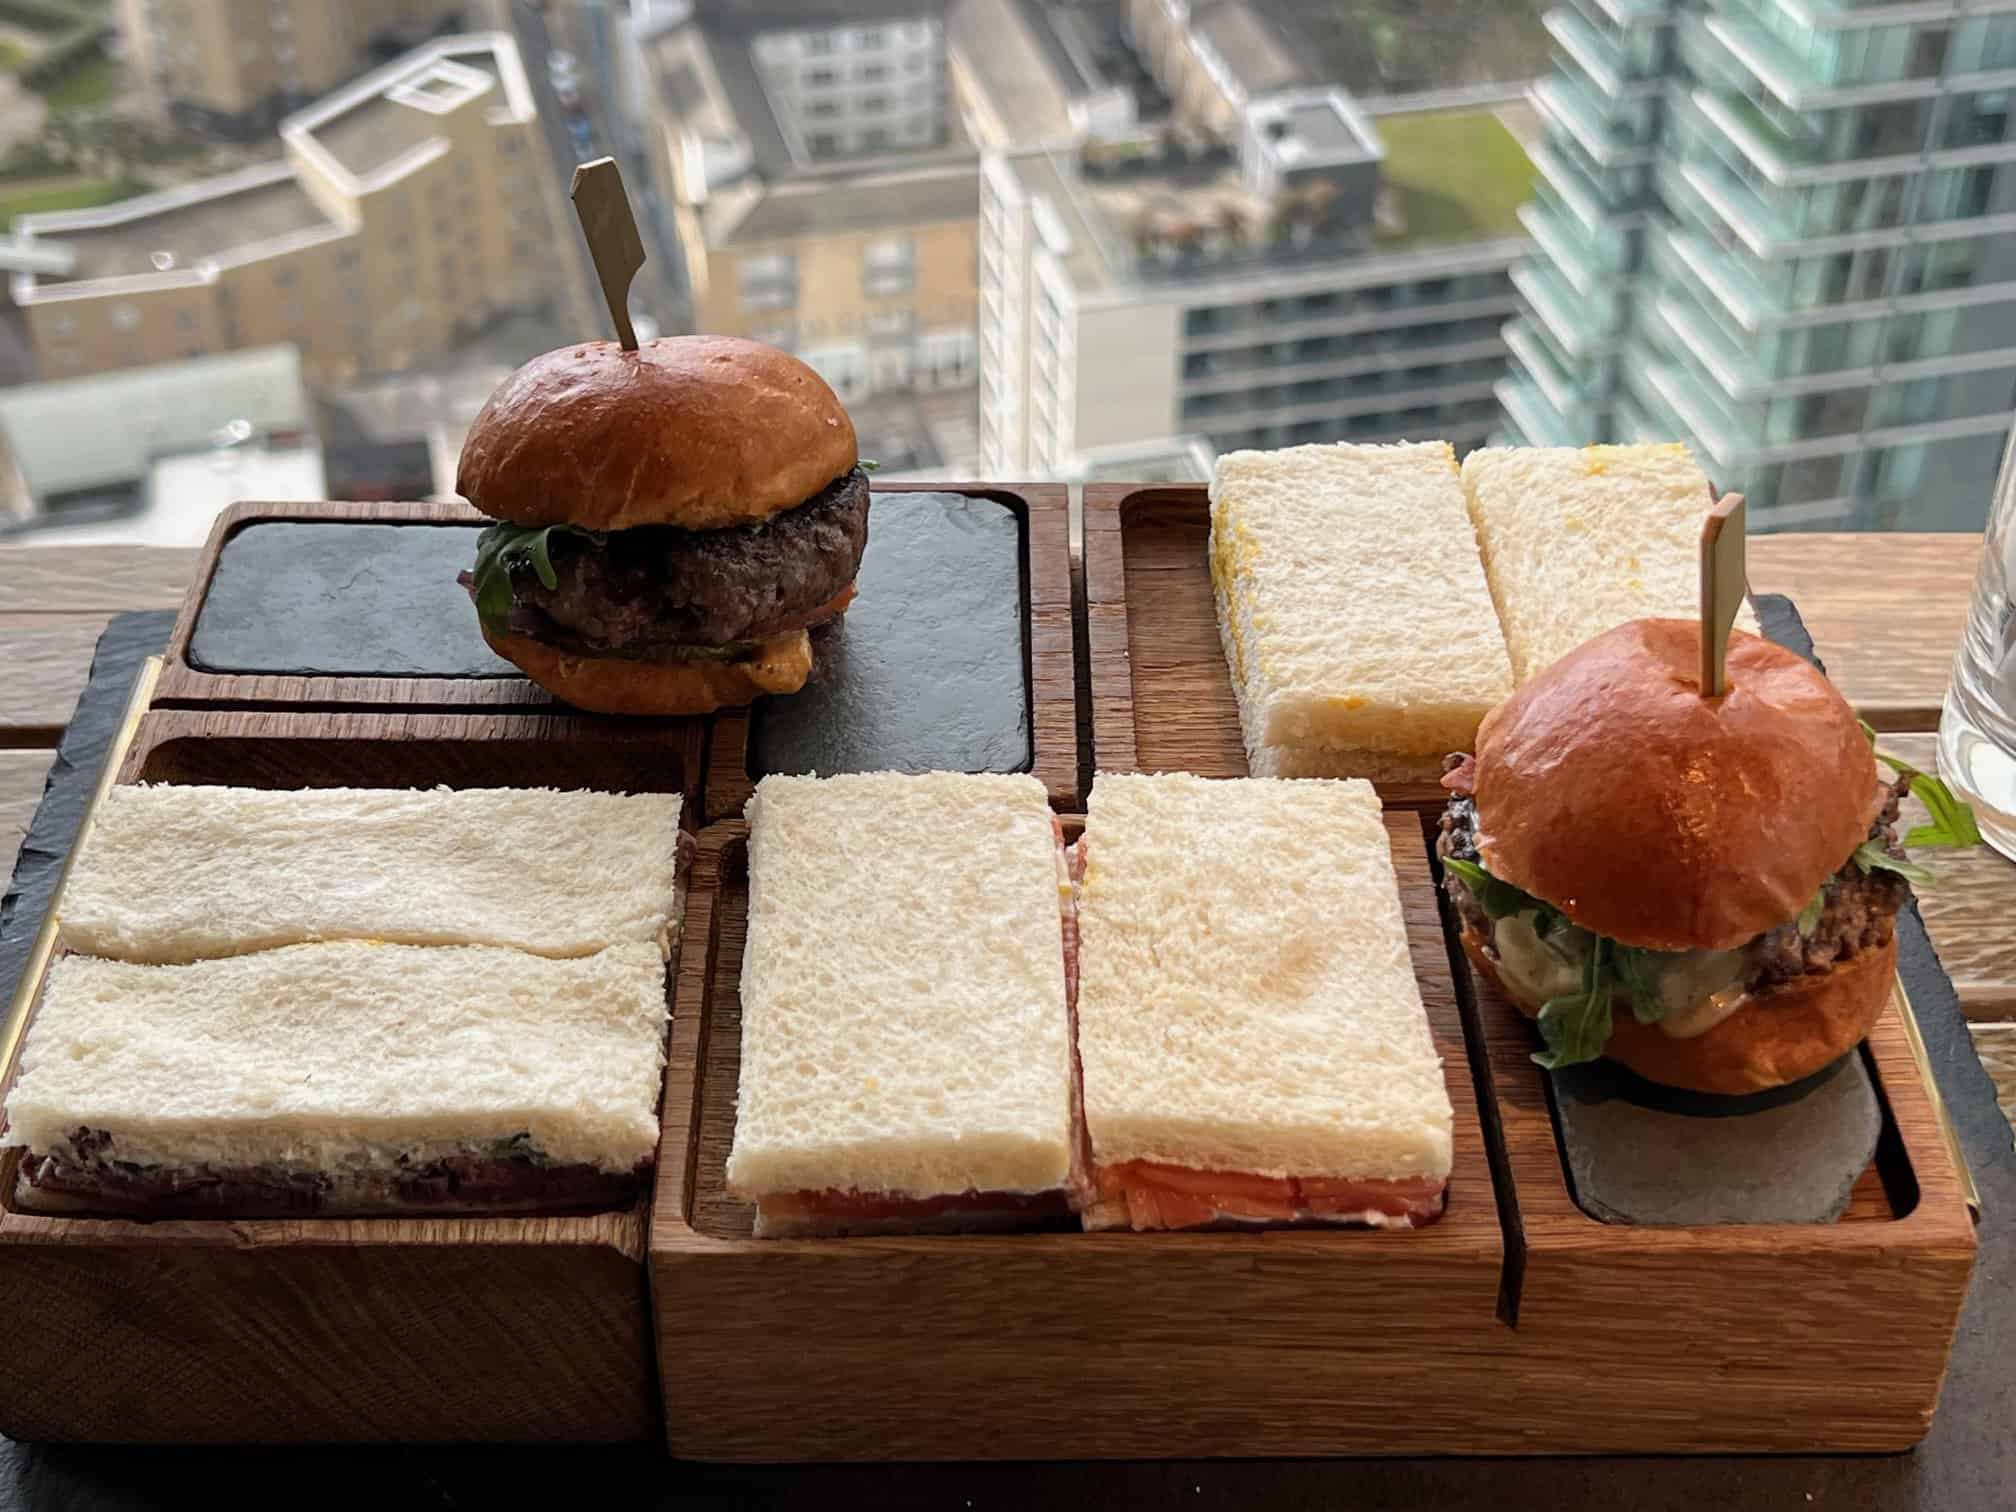 A review of Bokan 38’s afternoon tea – Canary Wharf